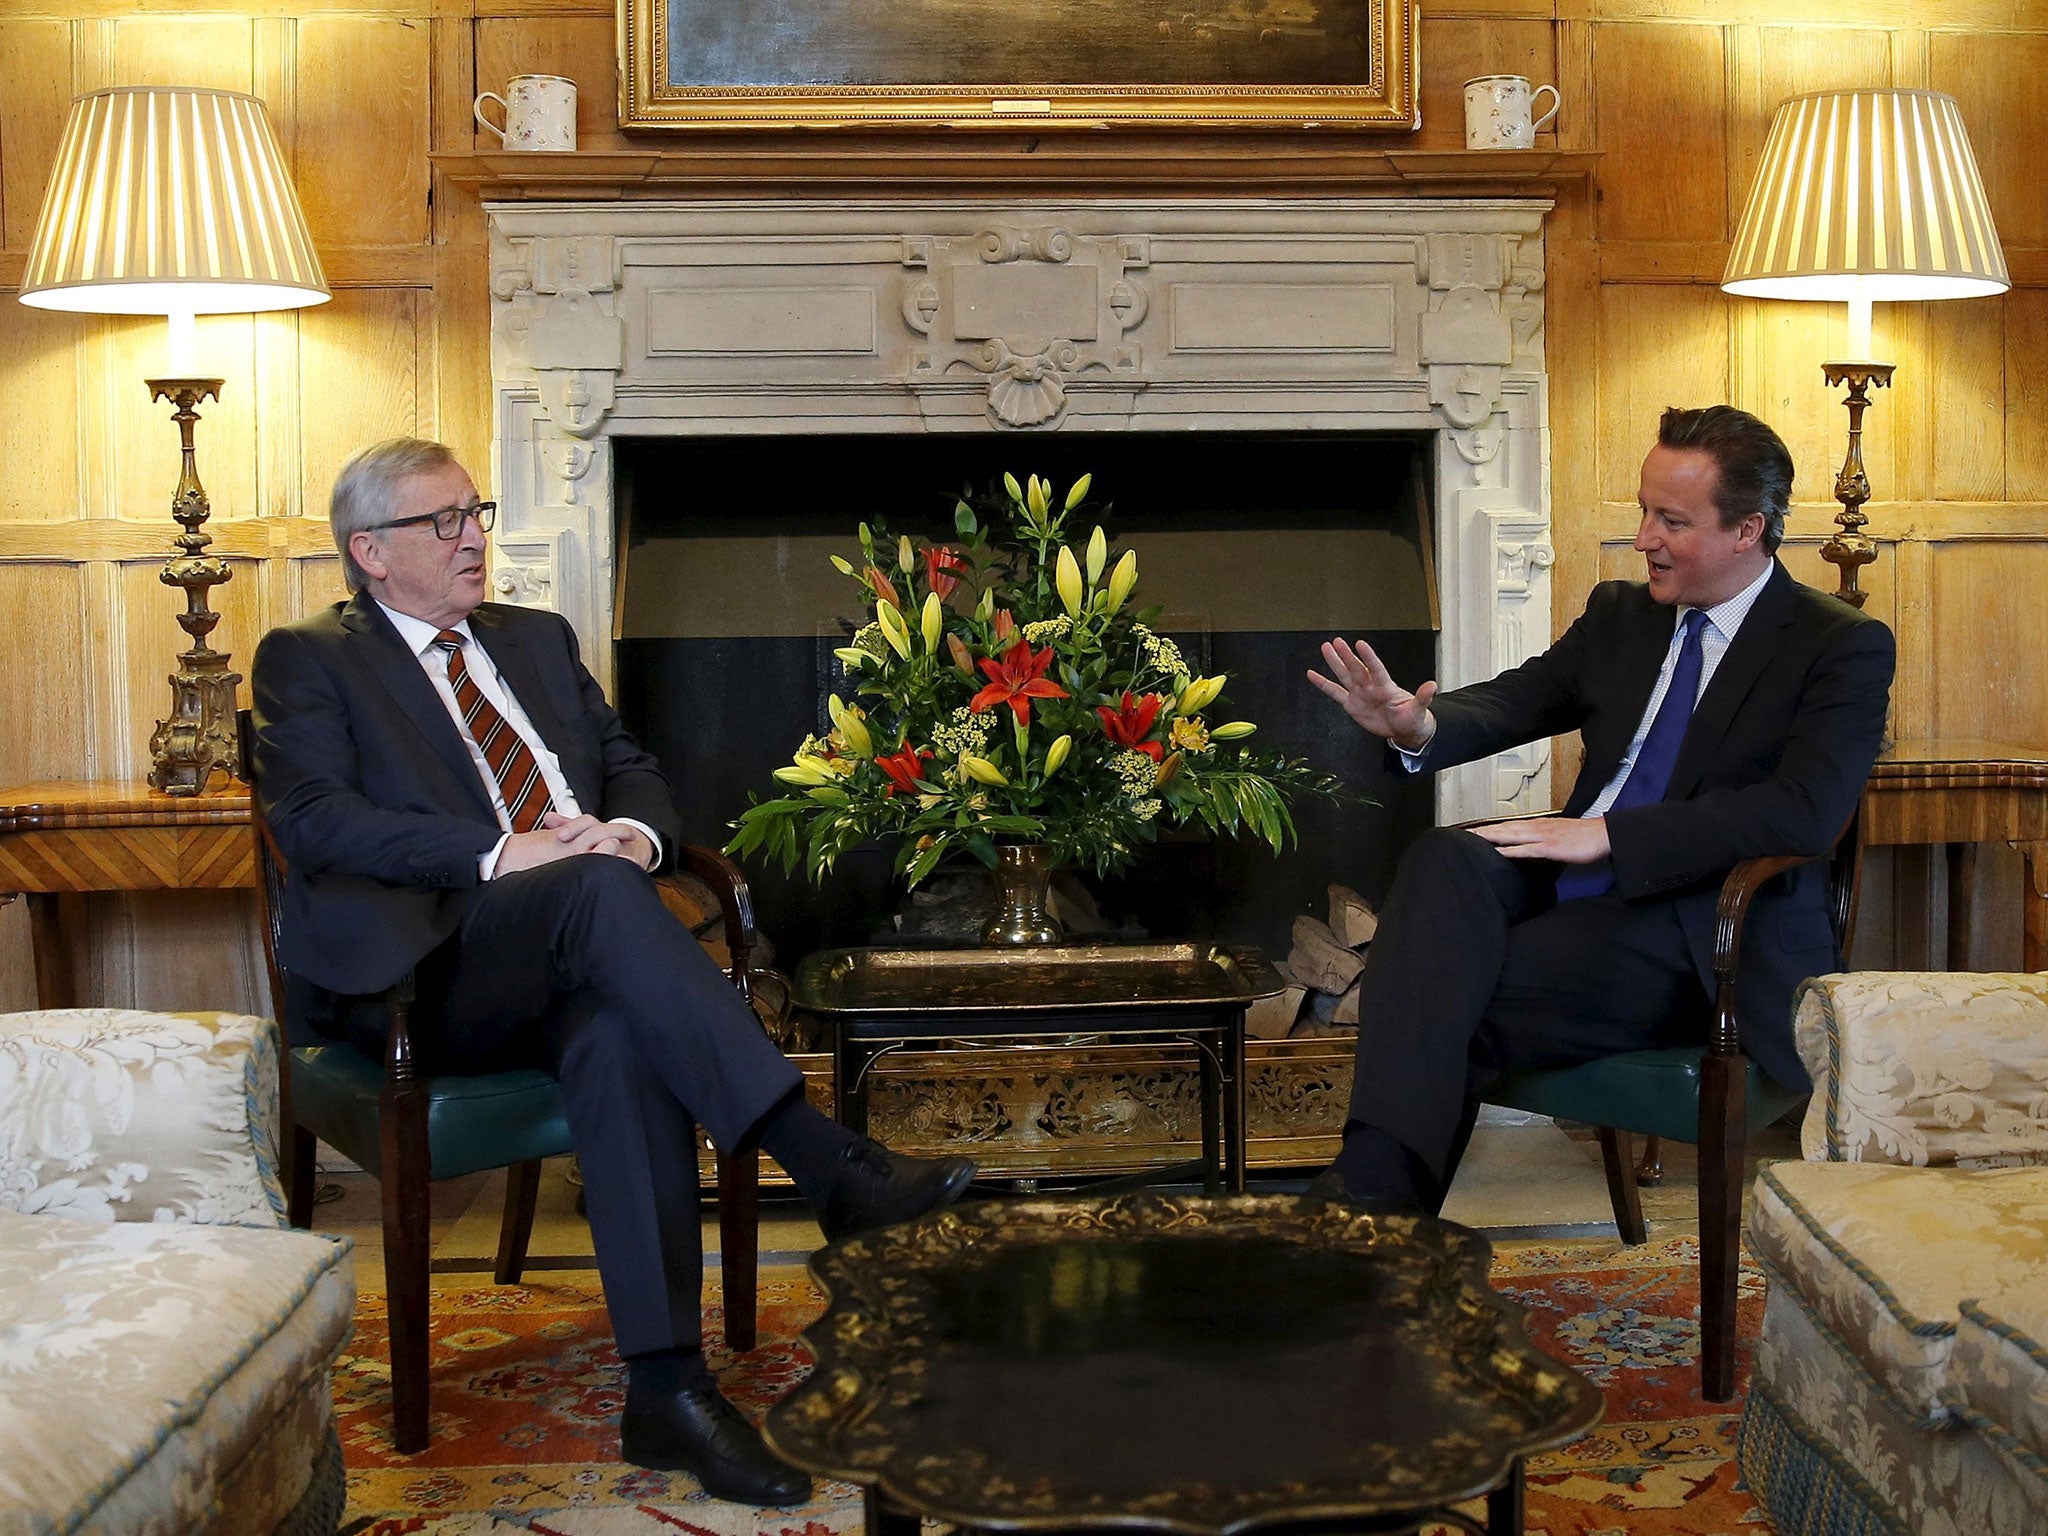 European Commission President Jean-Claude Juncker, left, meets Prime Minister David Cameron at Chequers